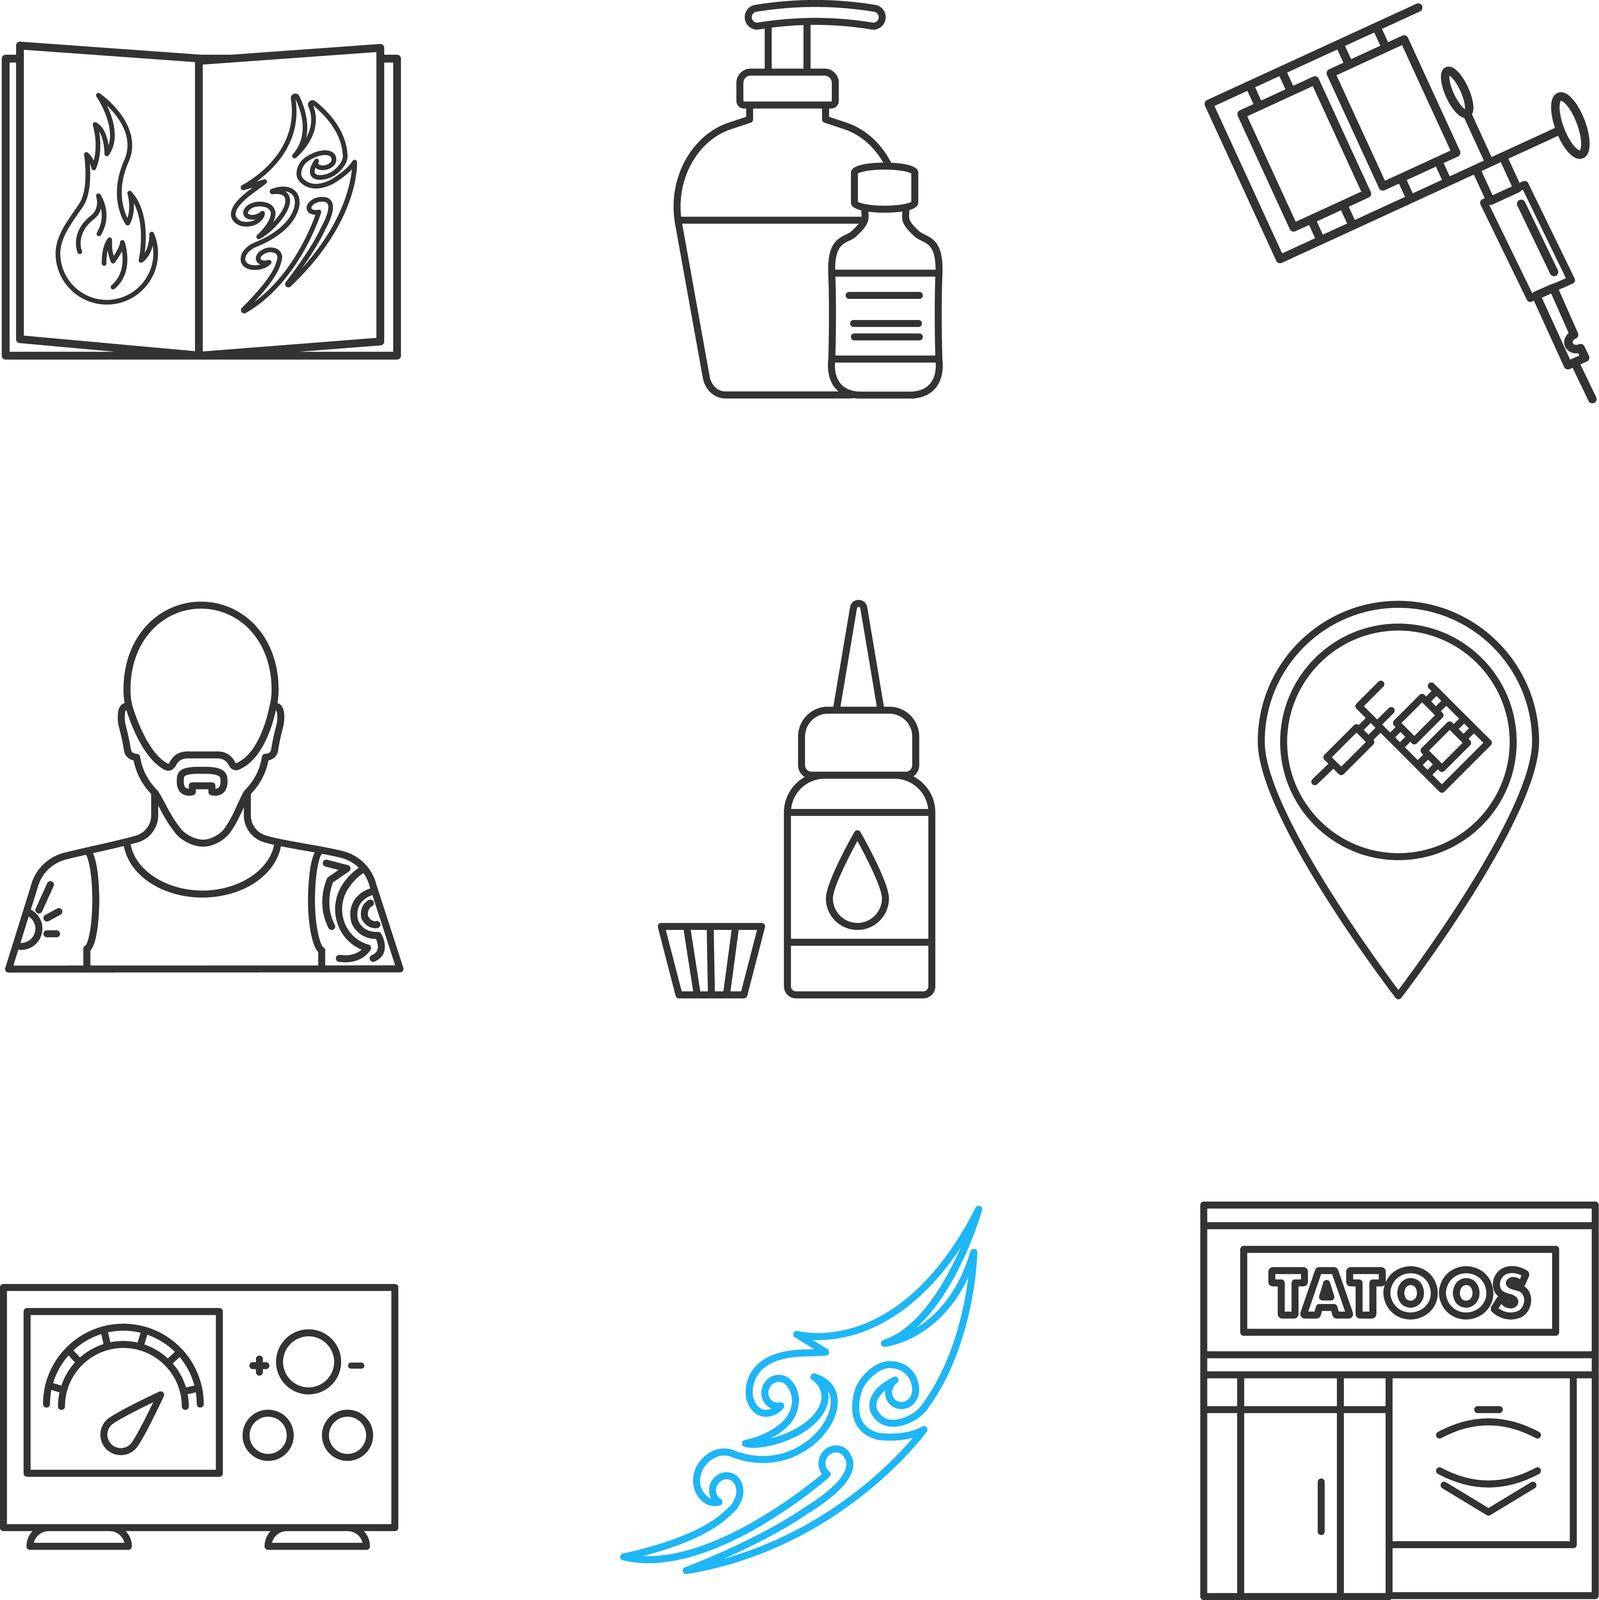 Tattoo studio linear icons set. Thin line contour symbols. Tattoos catalog, aftercare, machine, tattooer, ink, studio location, power supply, sketch, parlour. Isolated vector outline illustrations